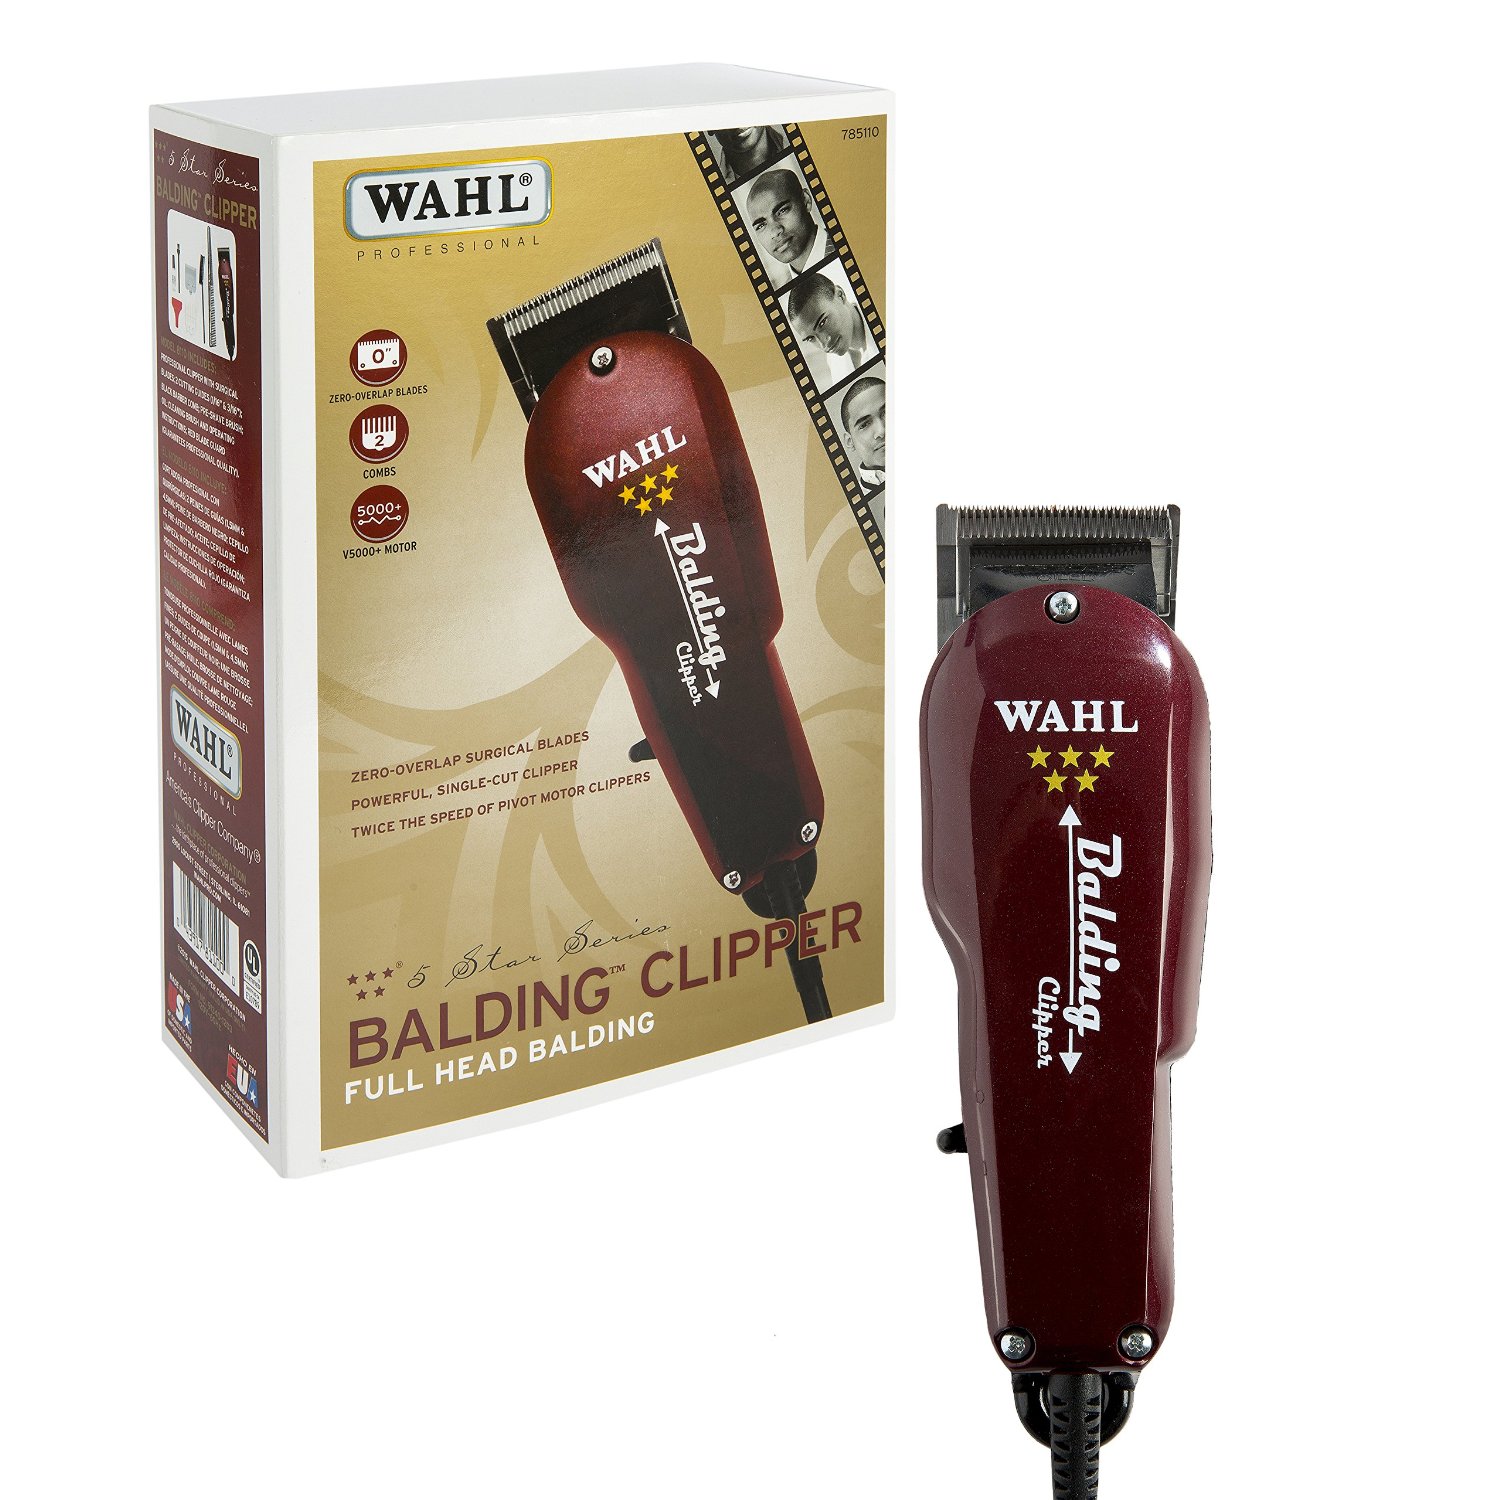 wahl 5 star balding clippers